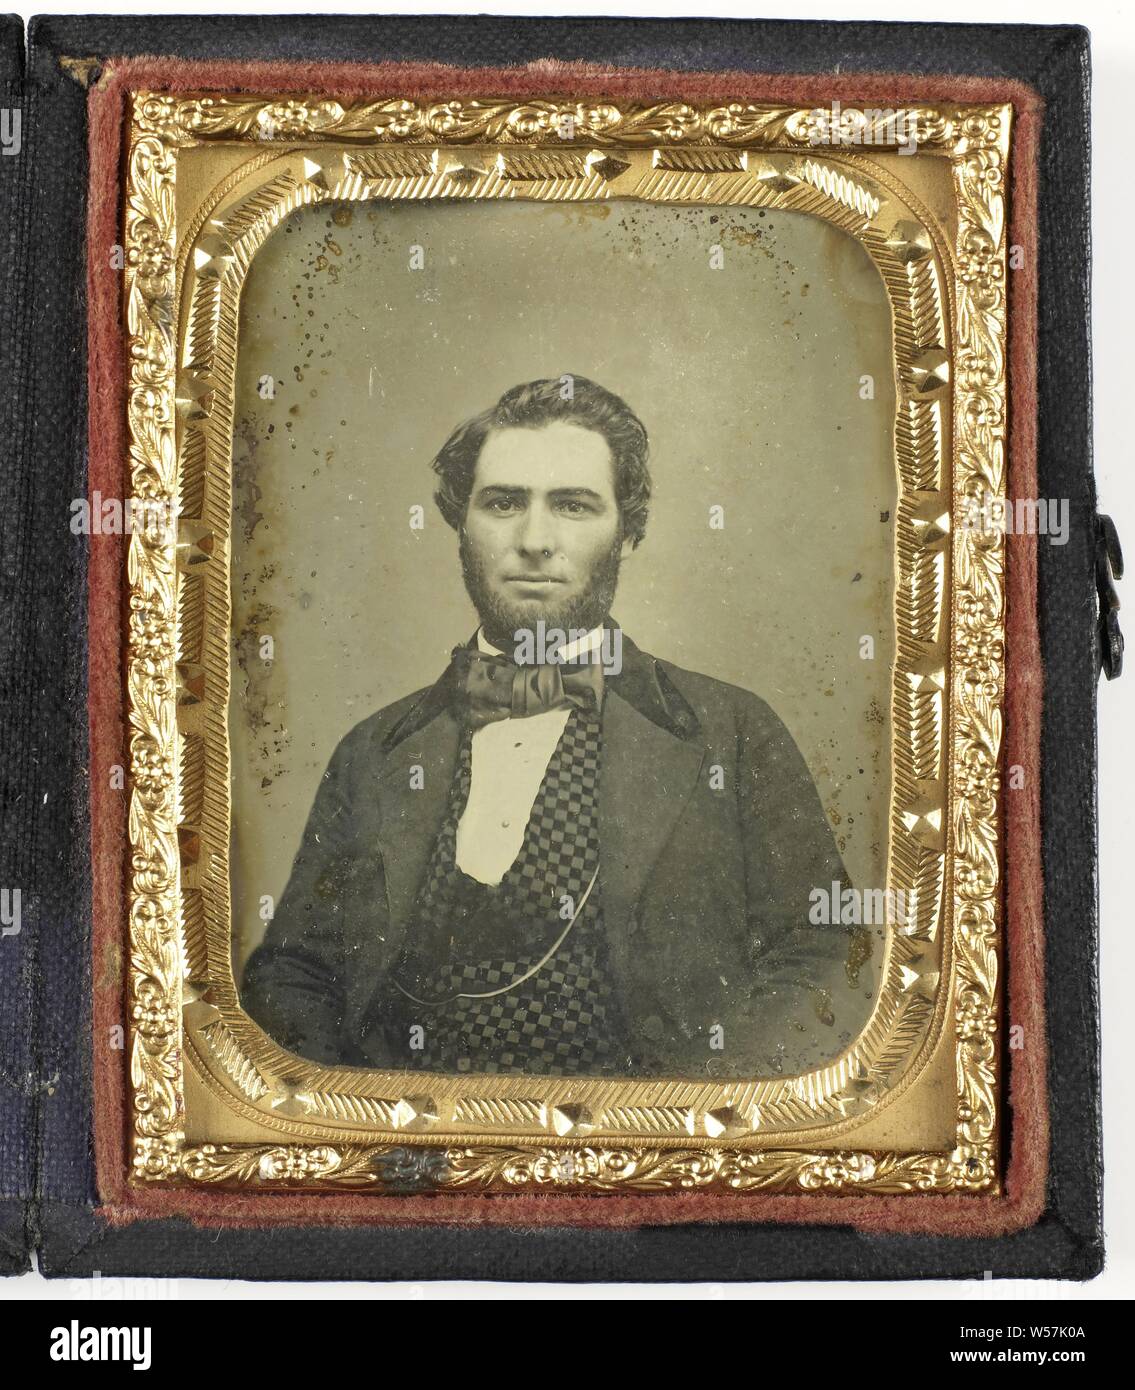 Portrait of an unknown bearded man, historical persons, adult man, anonymous, 1840 - 1860, copper (metal), glass, leather, velvet (fabric weave), h 50 mm × w 35 mm h 72 mm × w 60 mm × t 13 mm Stock Photo